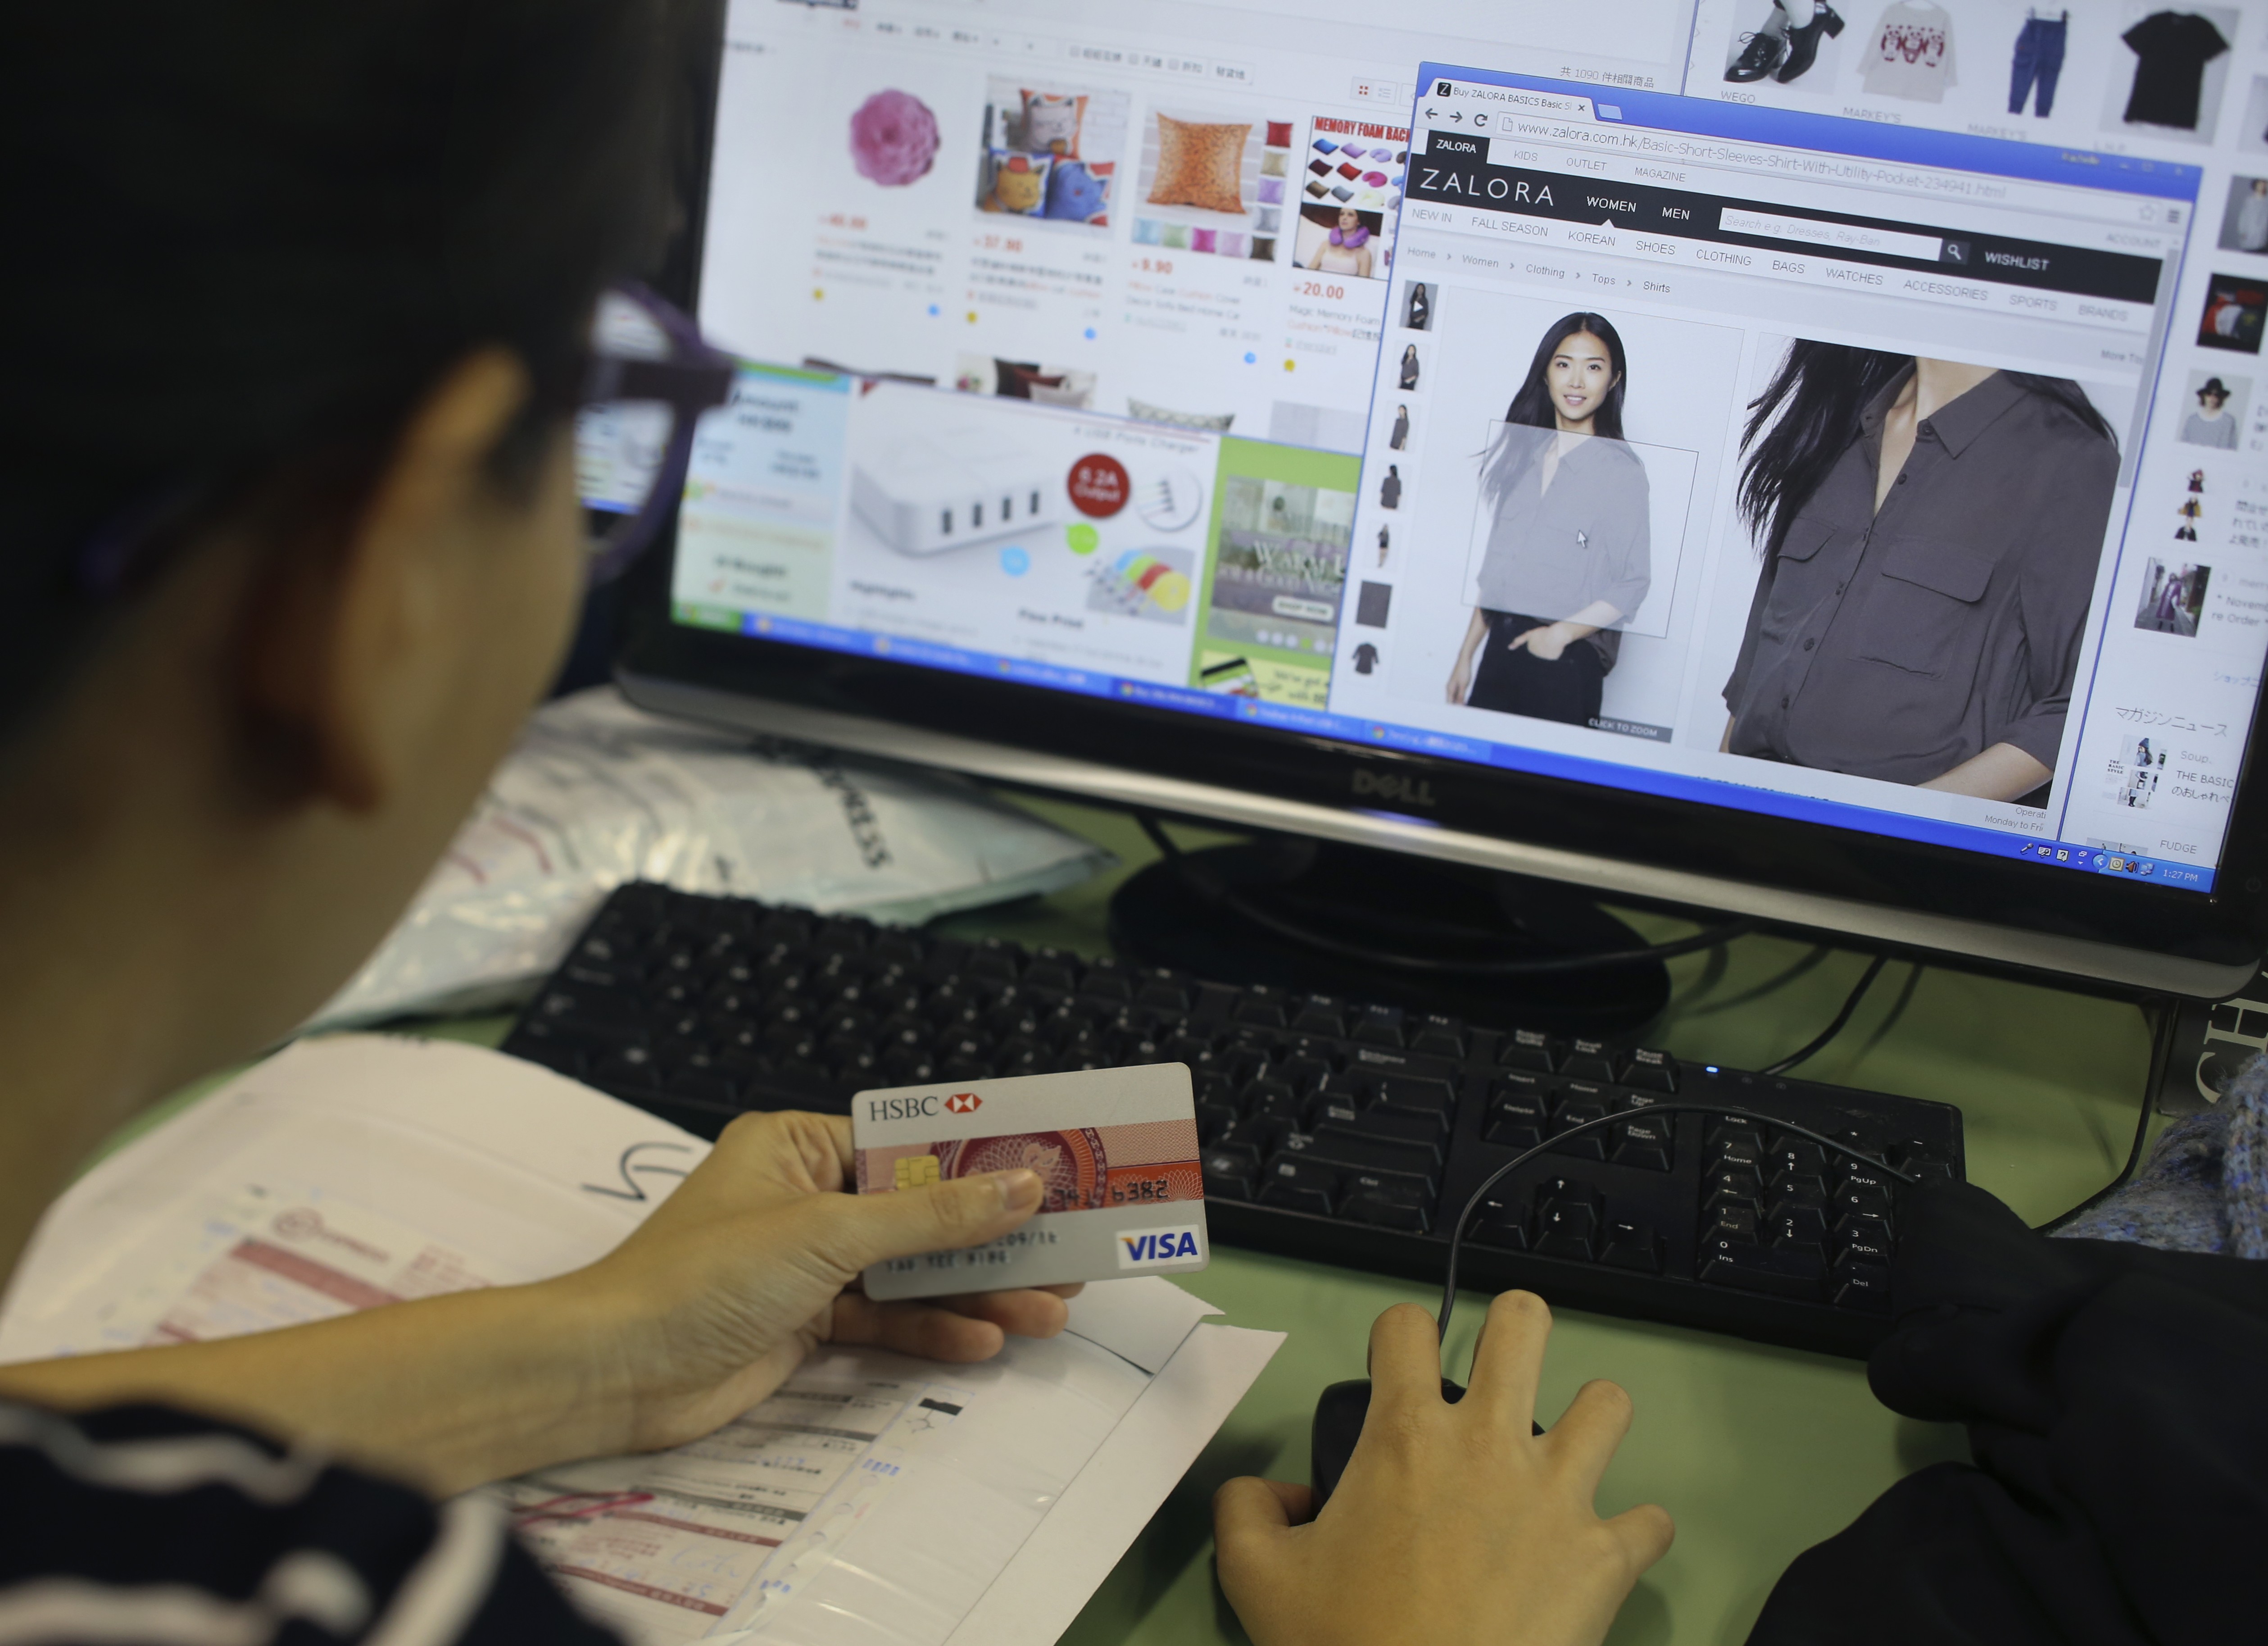 The number of people complaining about online purchases has soared. Photo: May Tse